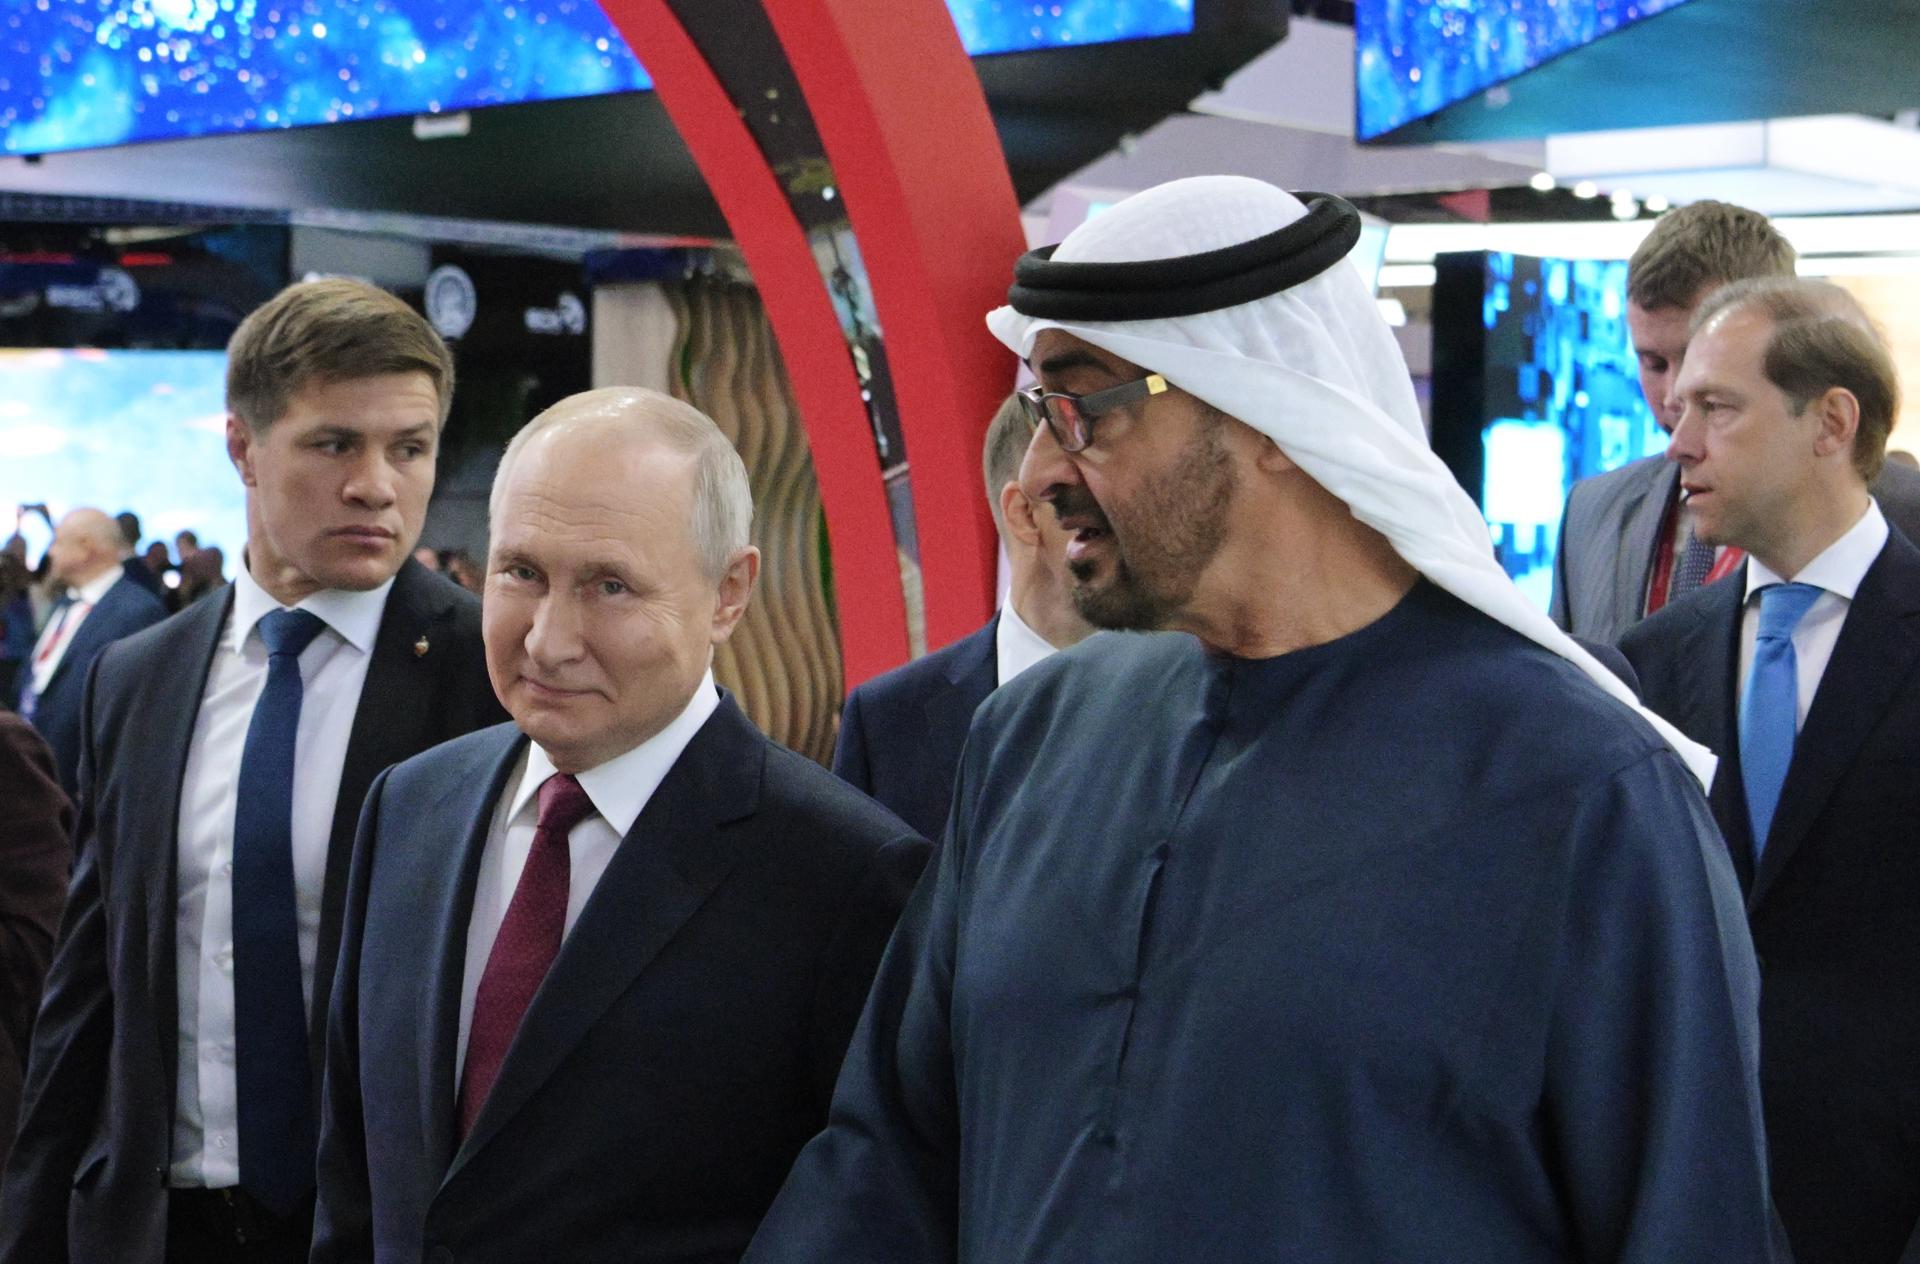 Russian President Vladimir Putin (front L) and United Arab Emirates President, Sheikh Mohamed bin Zayed Al Nahyan (front R) attend an exhibition of the United Arab Emirates during The St. Petersburg International Economic Forum (SPIEF) in St. Petersburg, Russia, 16 June 2023. EFE/EPA/ALEXEI NIKOLSKY / HOST PHOTO AGENCY / POOL MANDATORY CREDIT